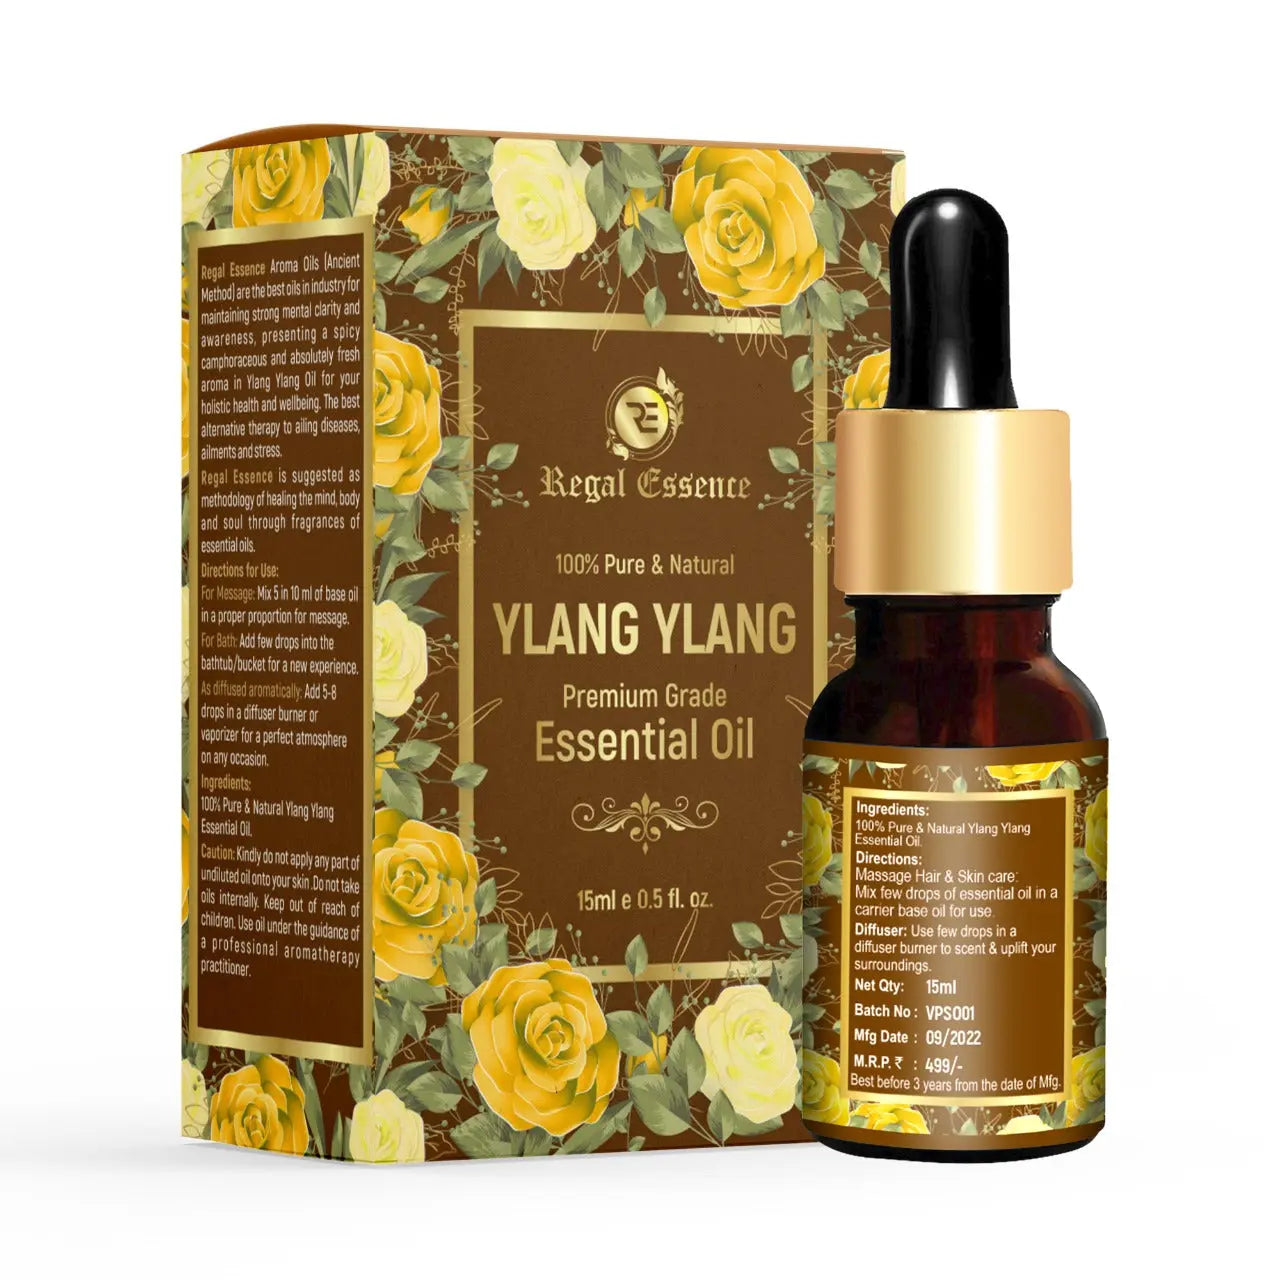 REGAL ESSENCE Ylang Ylang Essential Oil-Pure, Organic, Natural & Undiluted Therapeutic Grade Oil| Healthy Hair, Face, Skin, Scalp, Control Acne & Oily Skin, Aromatherapy 15ml Vedapure Naturals